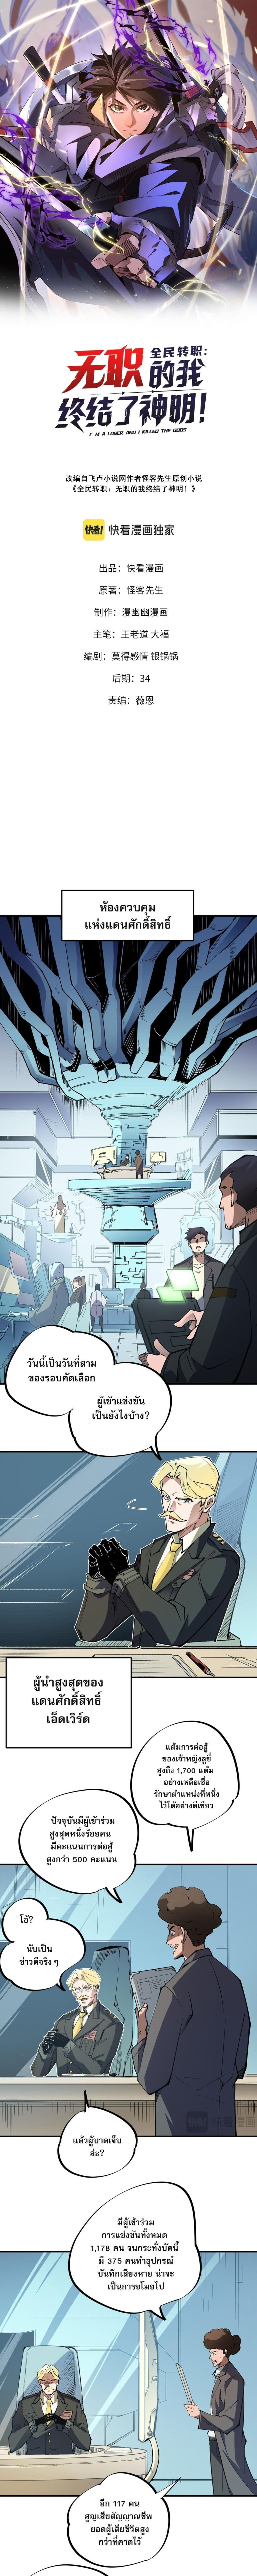 Job Changing for the Entire Population: The Jobless Me Will Terminate the Gods ฉันคือผู้เล่นไร้อาชีพที่สังหารเหล่าเทพ 64-64